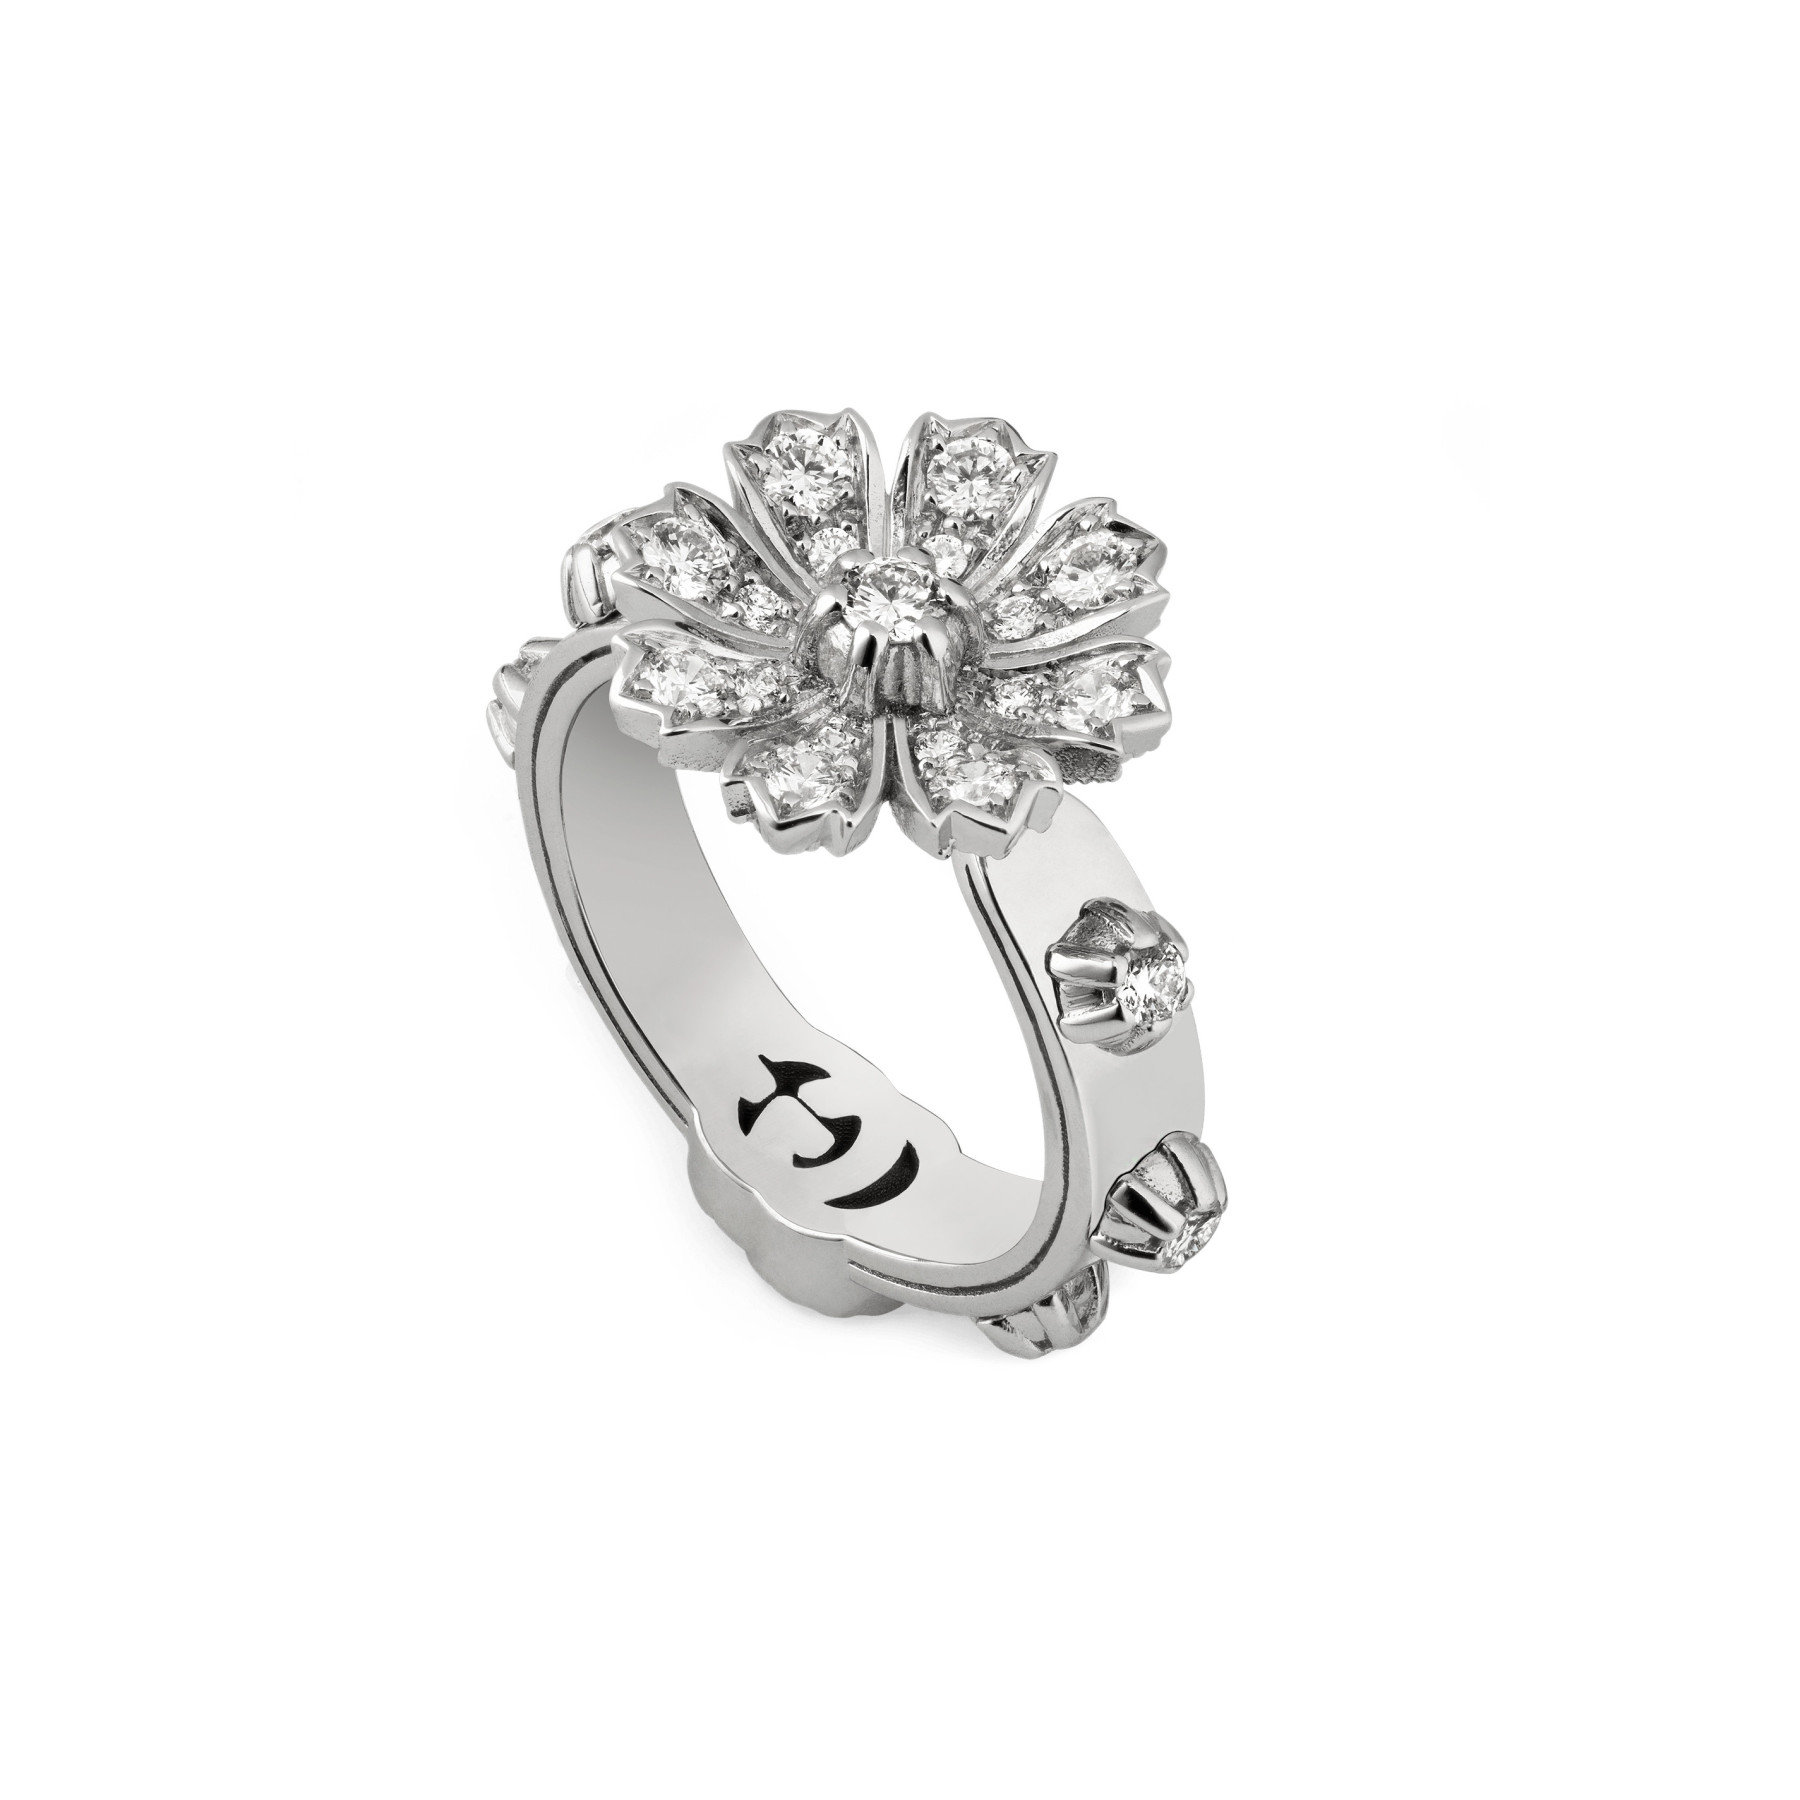 Gucci Flora Diamond Flower Ring in White Gold